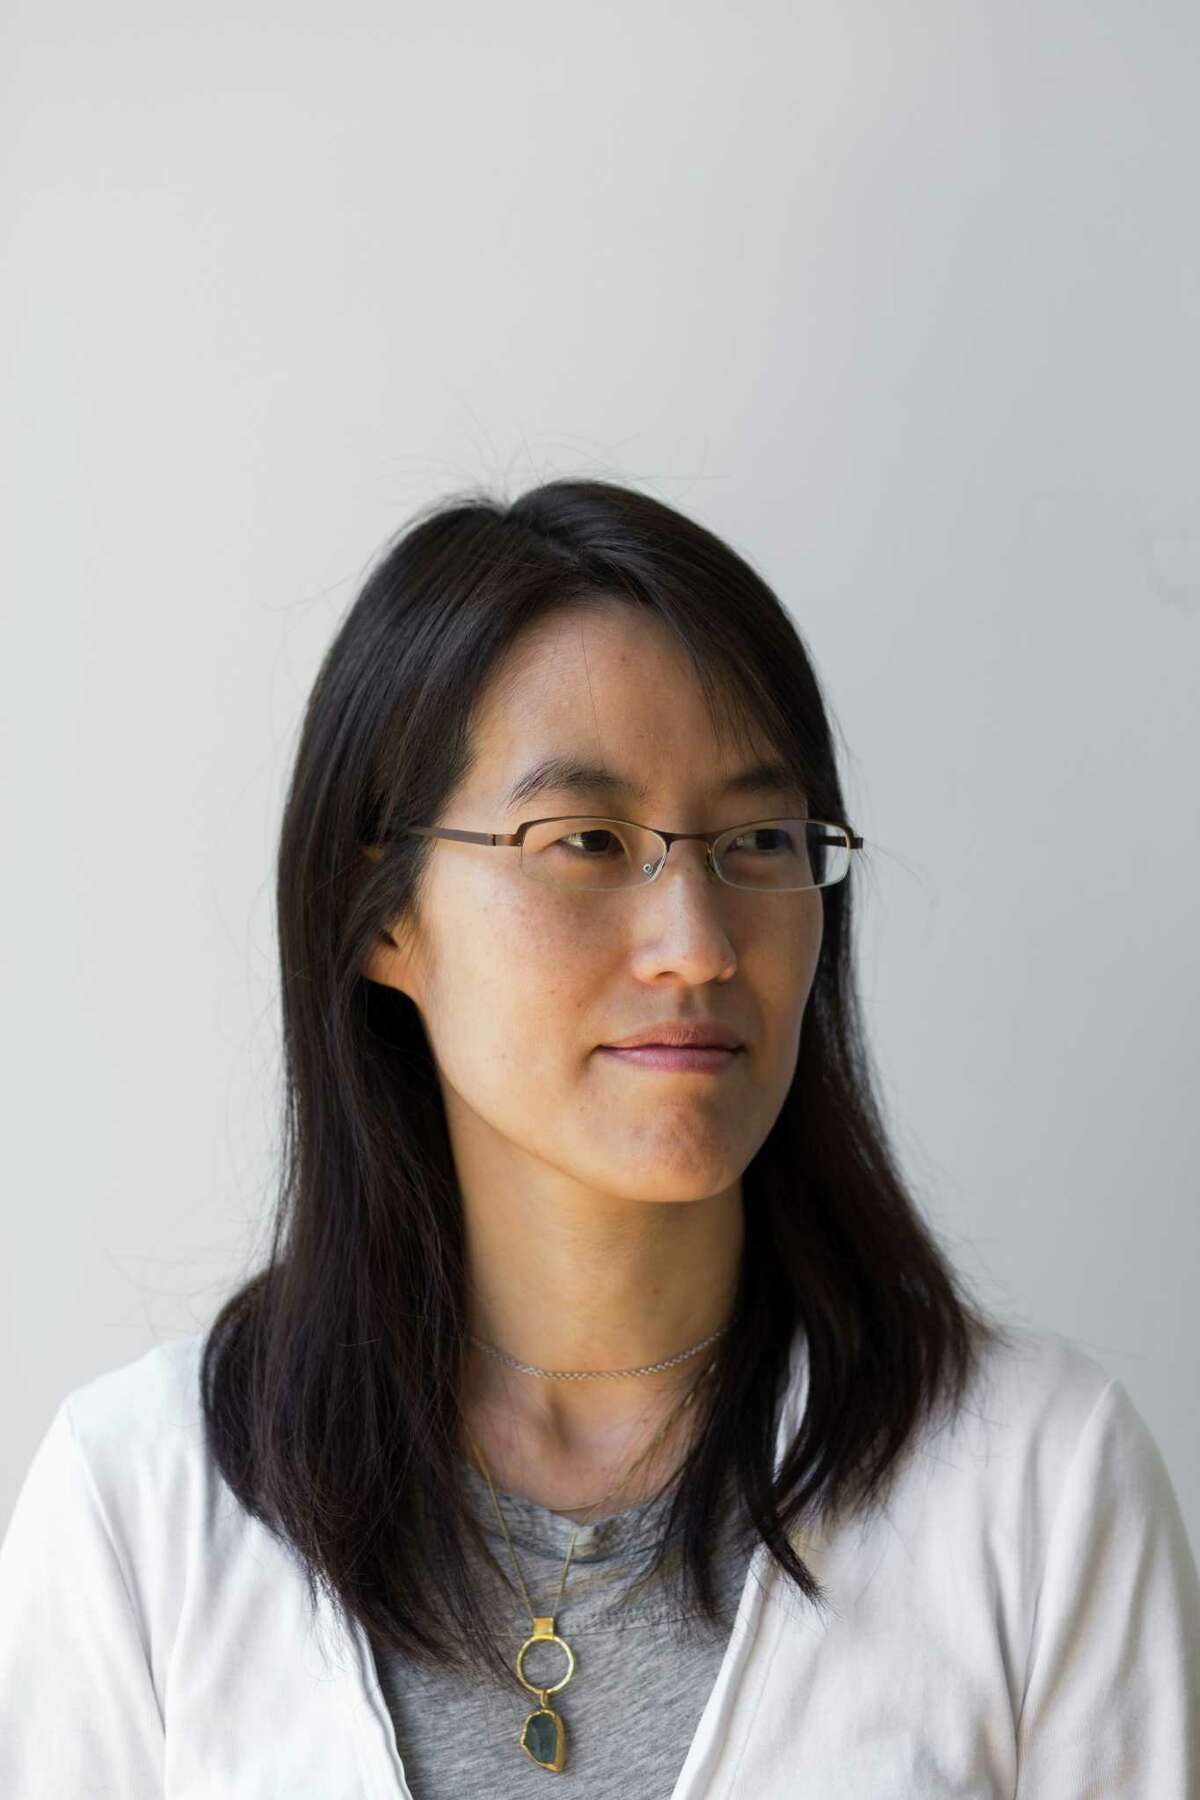 Ellen Pao, plaintiff in the suit against the prominent venture capital firm Kleiner Perkins, in San Francisco in July of last year.